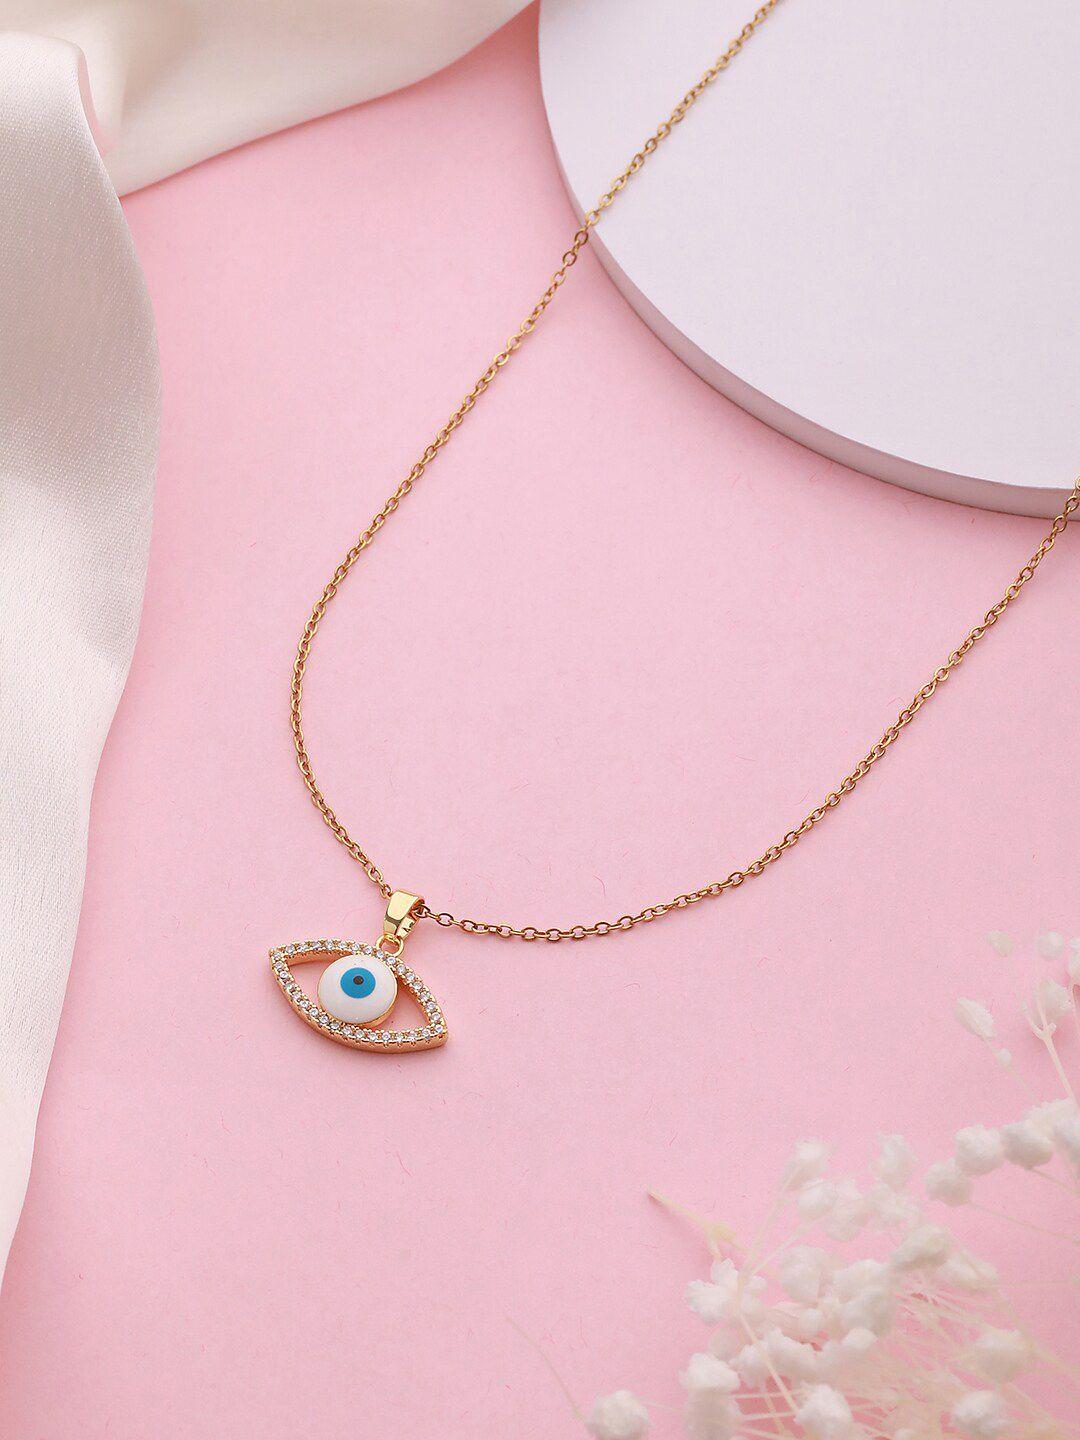 jazz-and-sizzle-gold-plated-cz-studded-evil-eye-pendant-chain